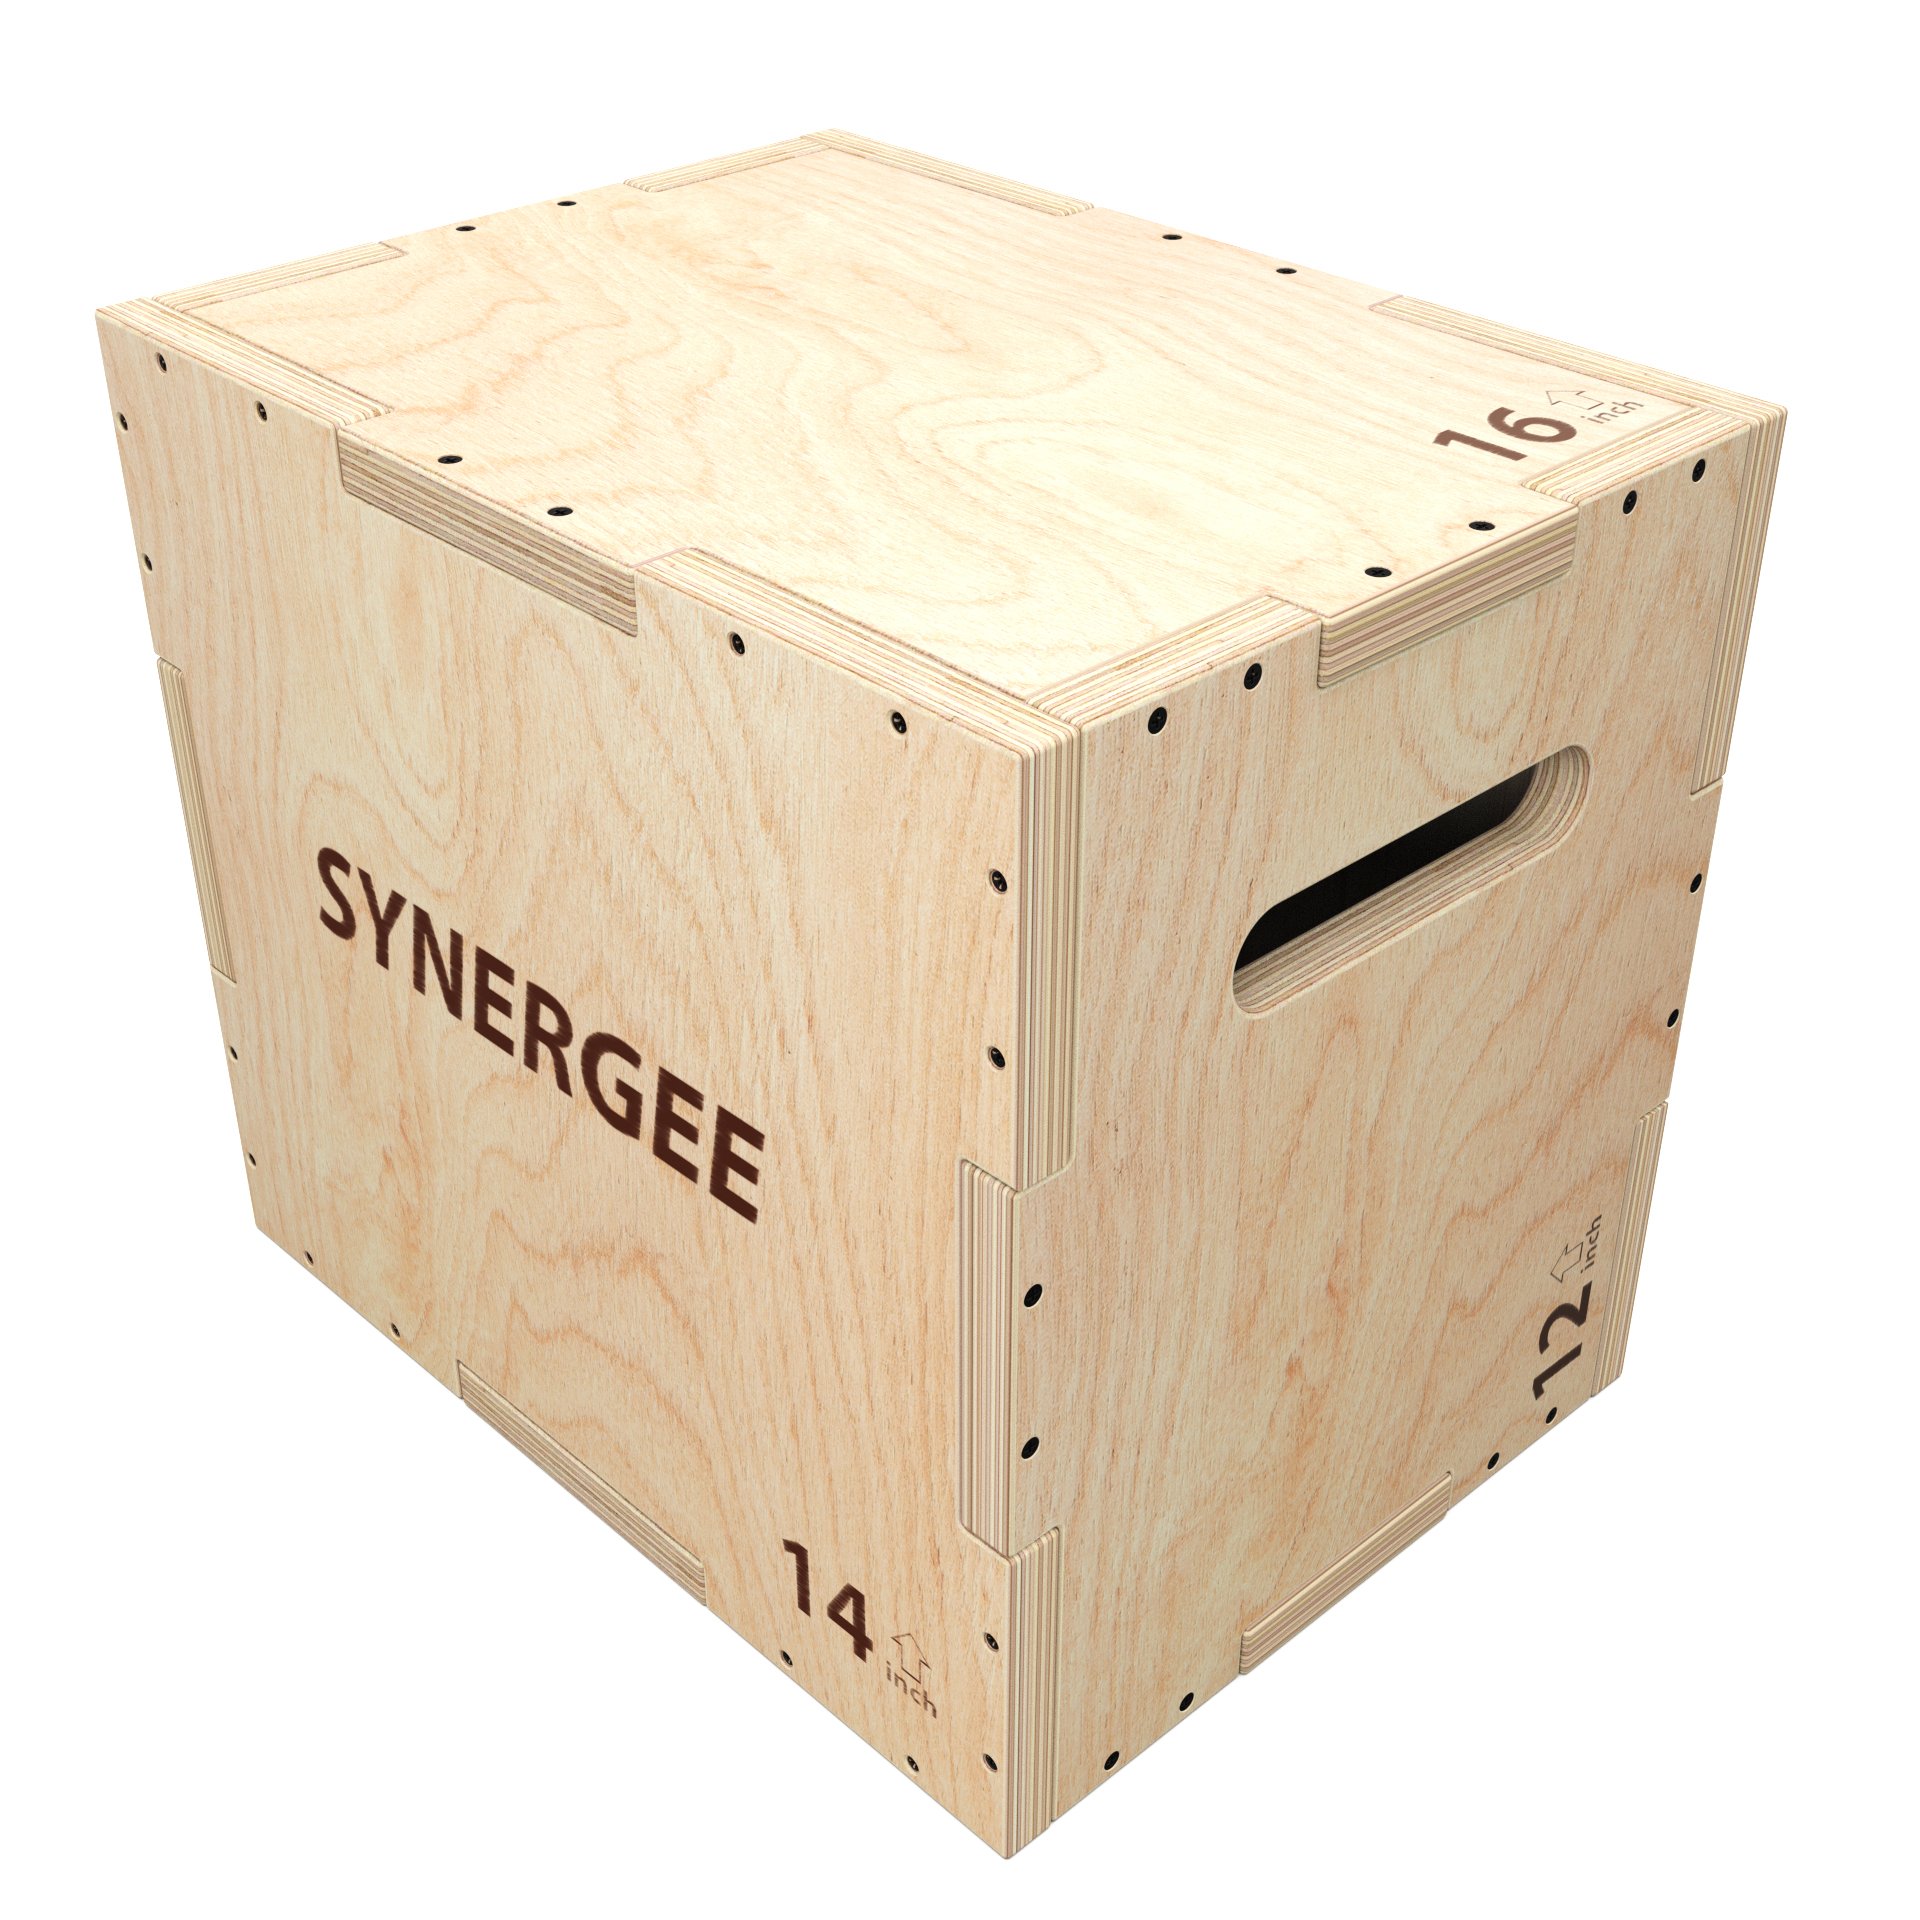 Synergee 3 in 1 Wood Plyometric Box for Jump Training and Conditioning